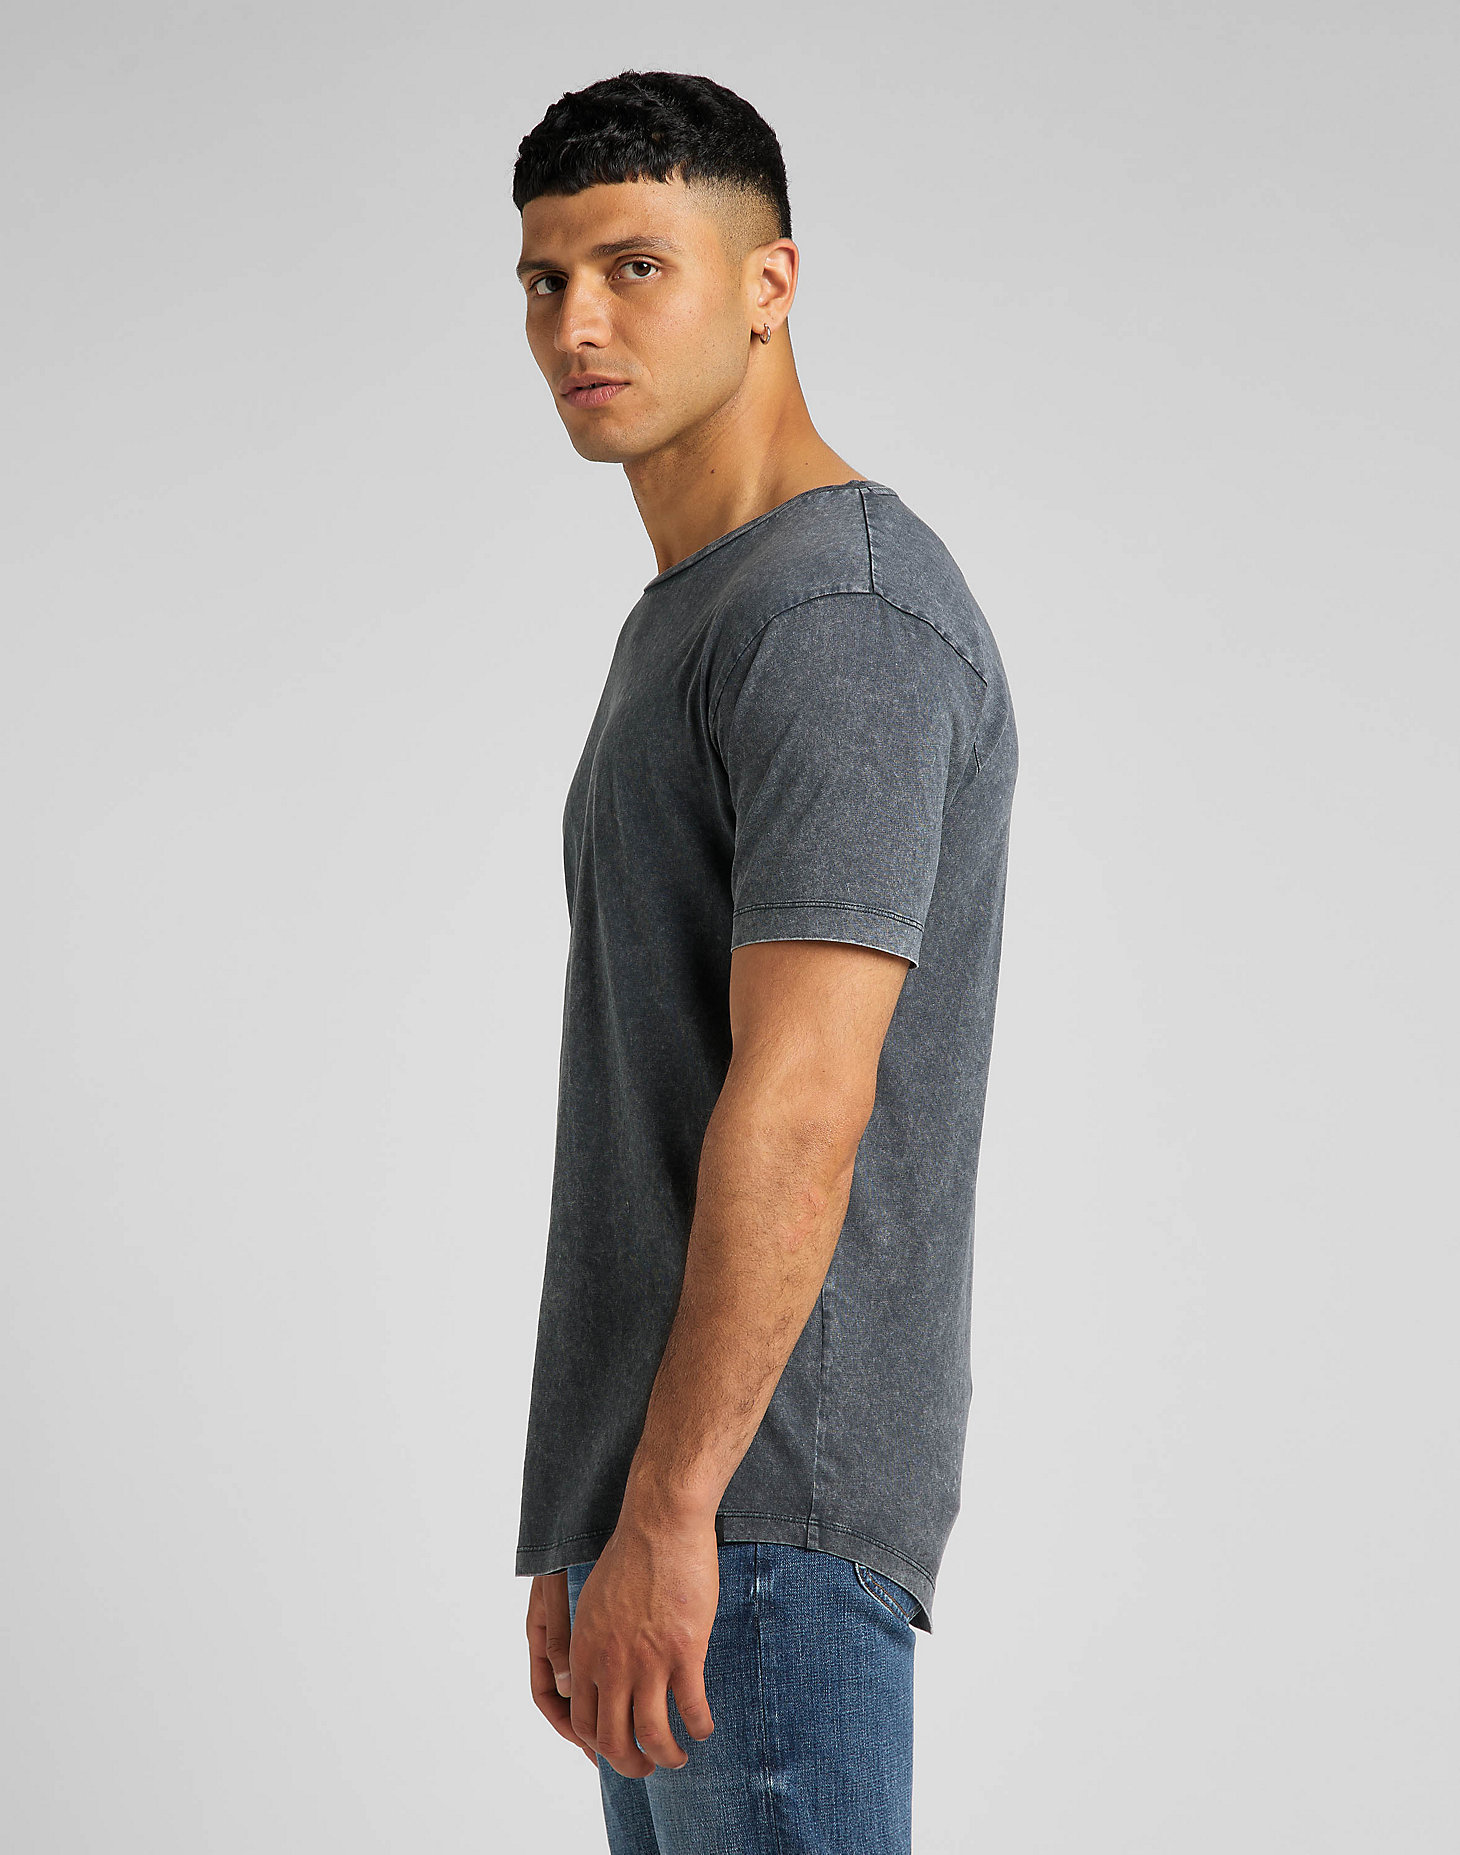 Shaped Tee in Charcoal alternative view 3